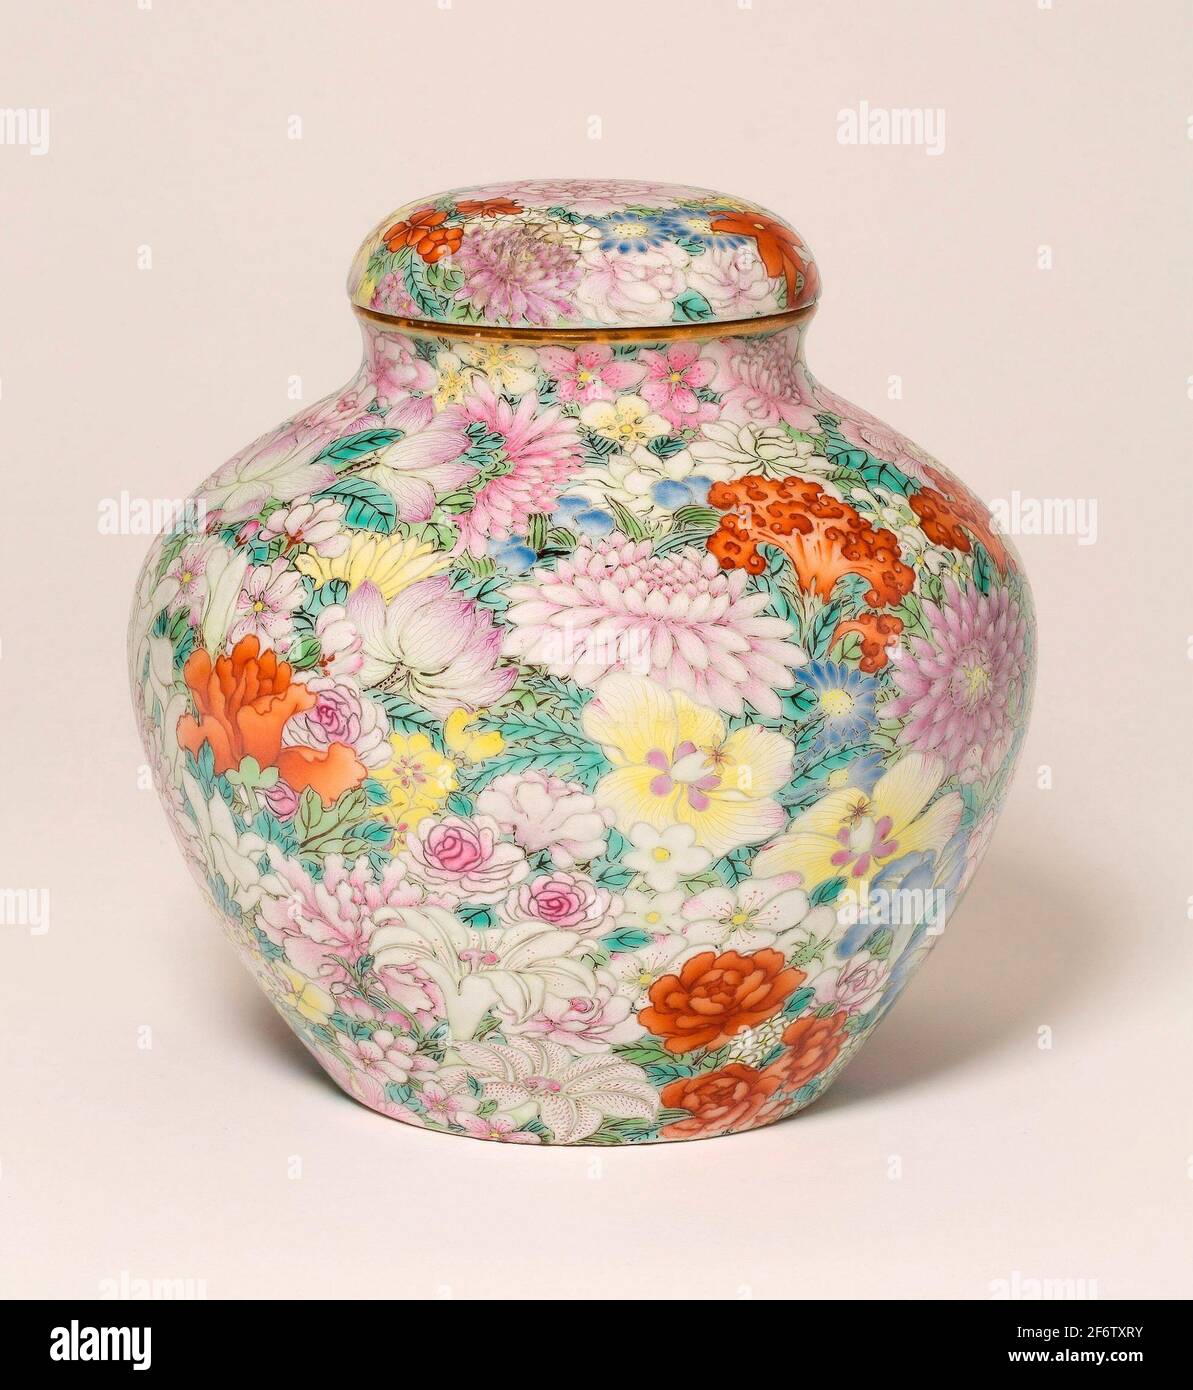 Covered Jar with Thousand Flowers (Millefleurs) Design - Qing dynasty (1644'1911), probably Jiaqing period (1796'1820) - China. Porcelain painted in Stock Photo